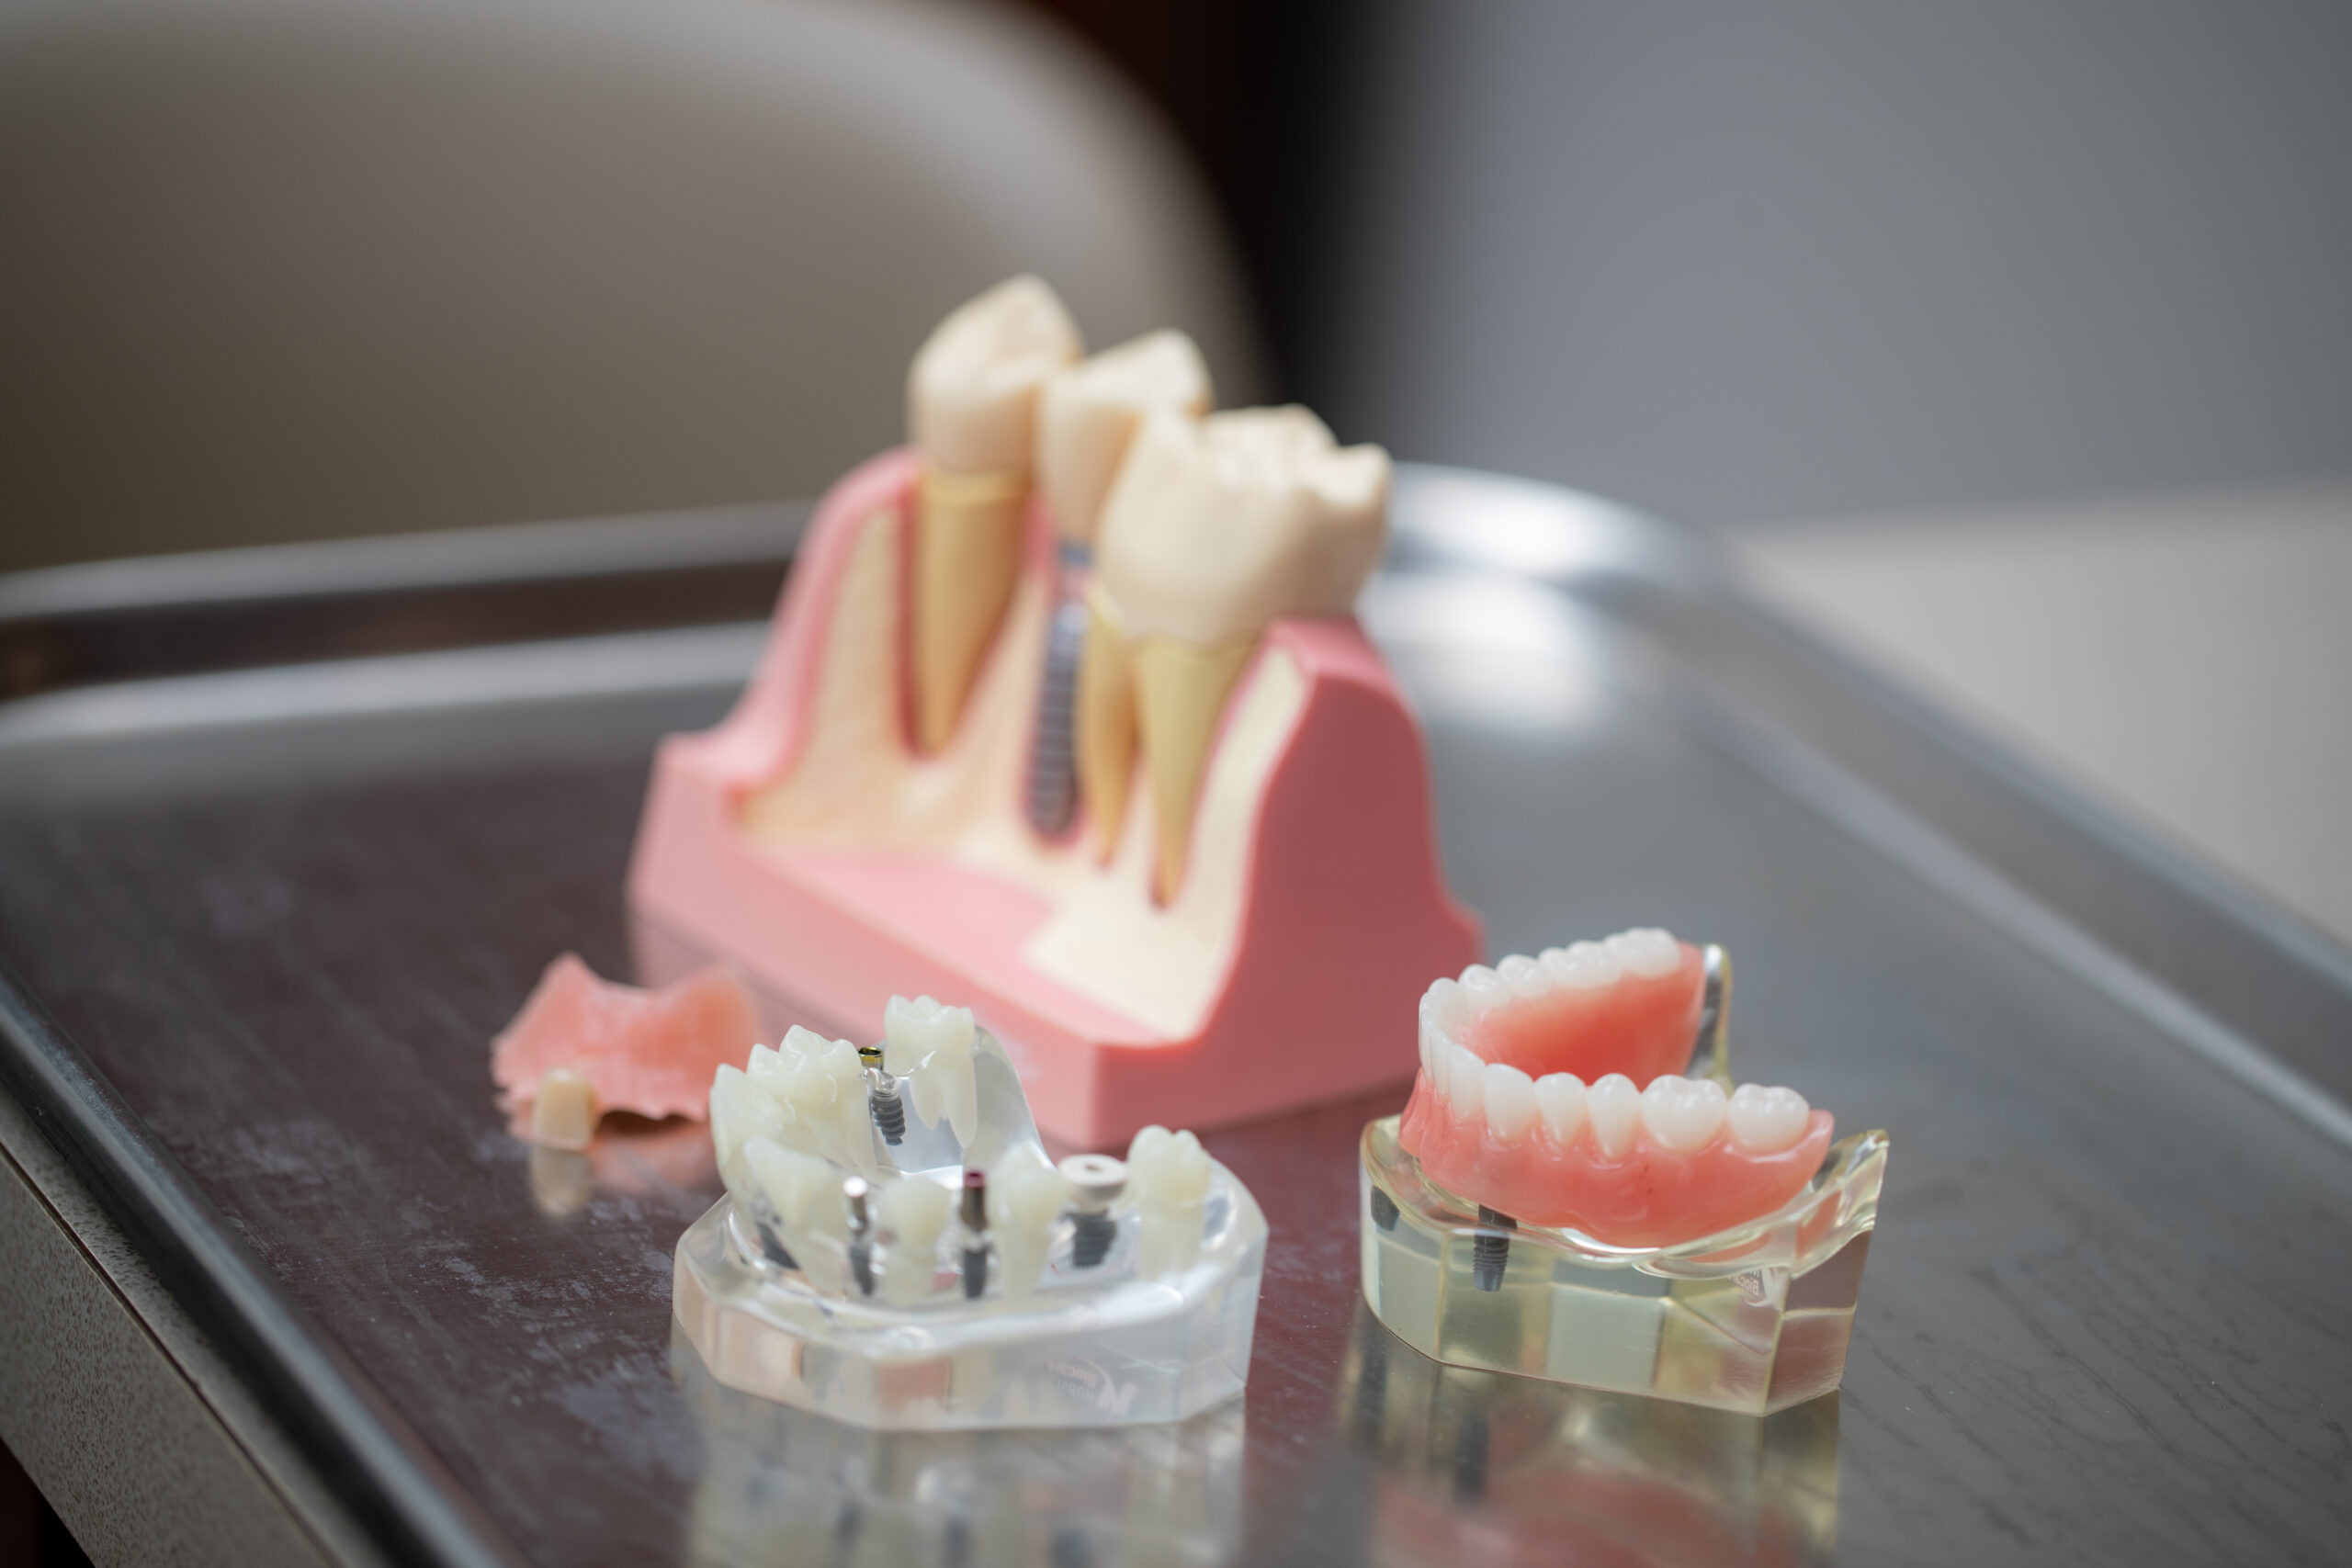 models of dental implants, dentures and tooth replacement options at Associated Oral & Implant Surgeons